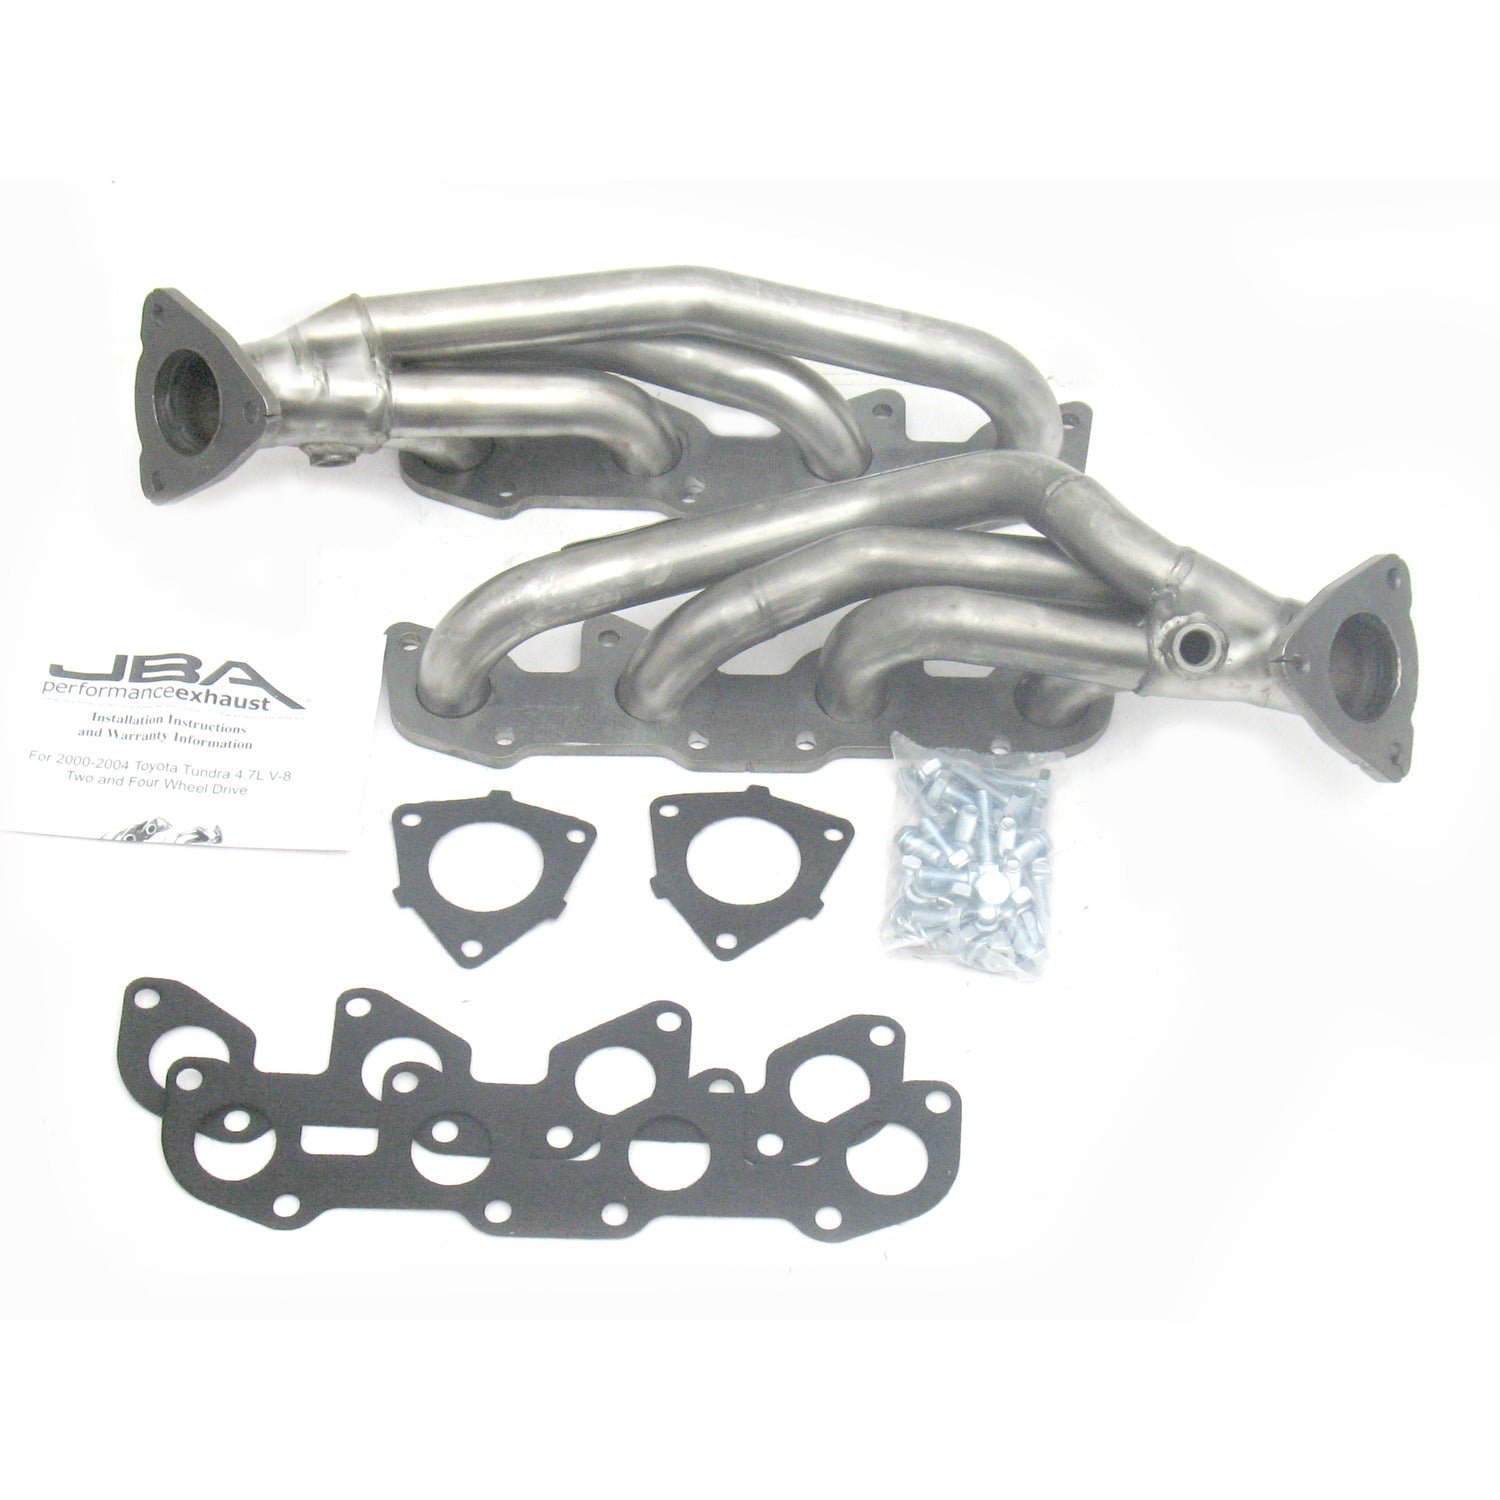 JBA Performance Exhaust 2010S 1 1/2" Header Shorty Stainless Steel 00-04 Tundra/Sequoia 4.7L